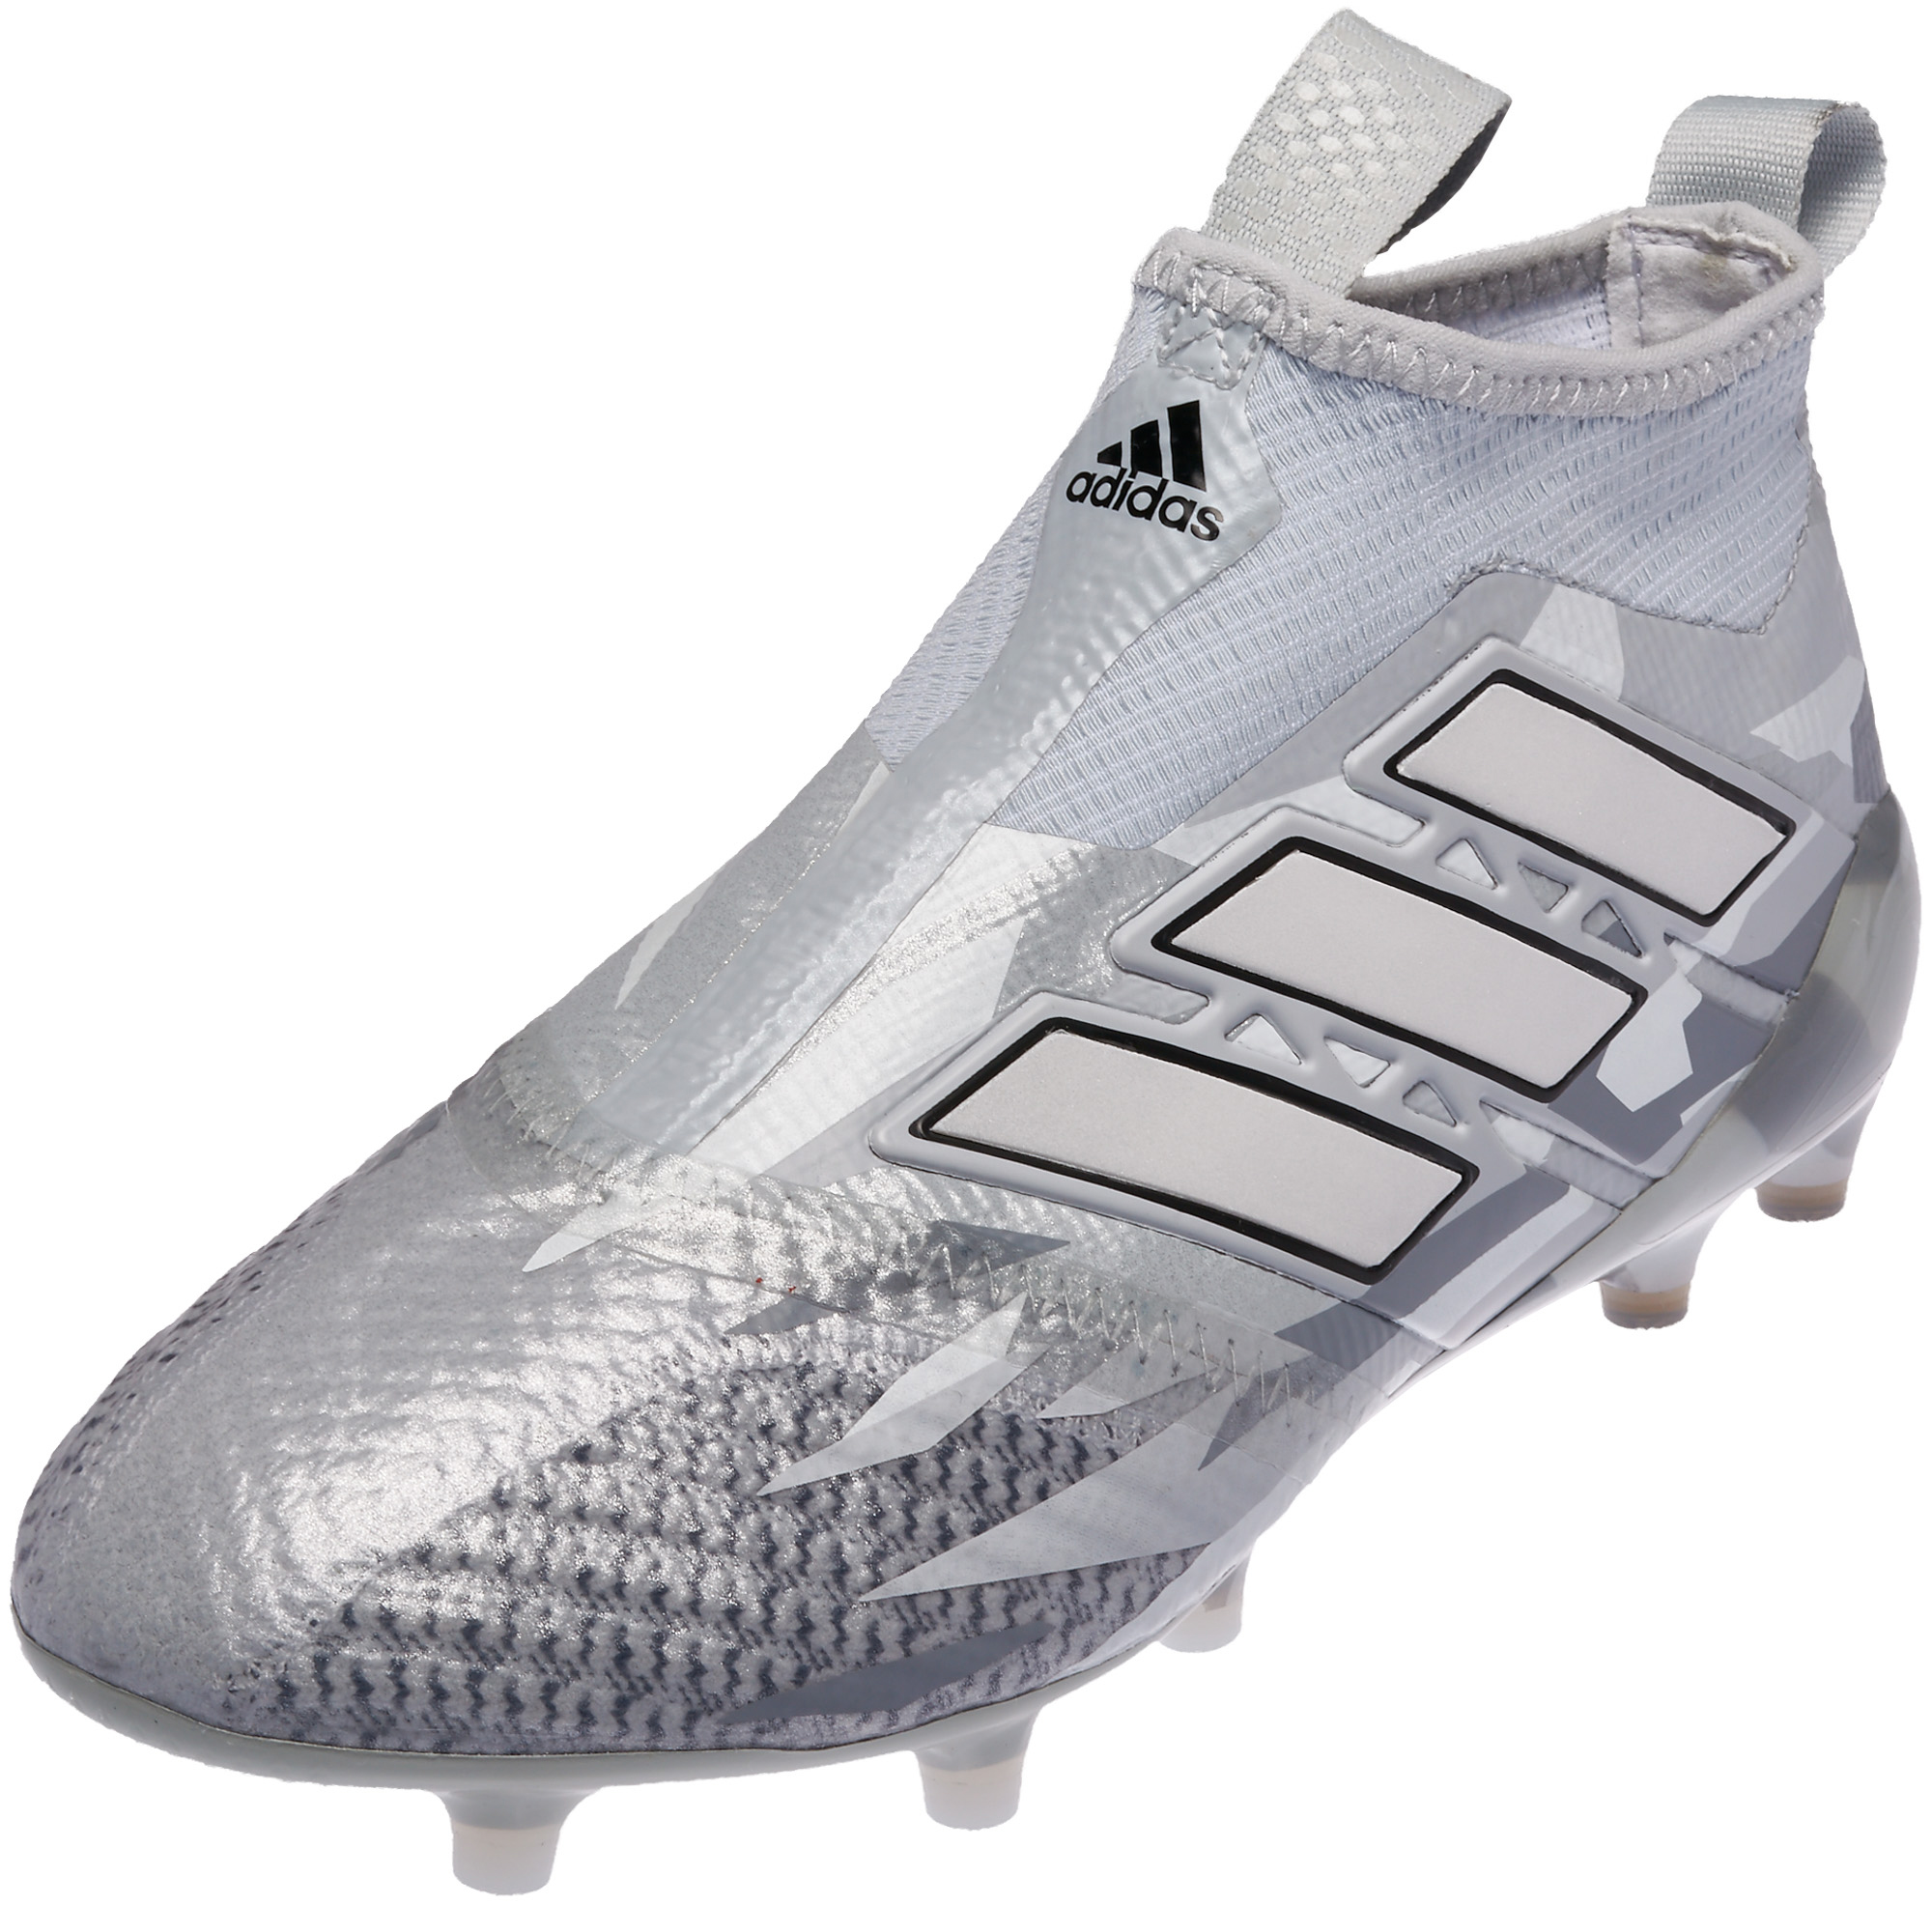 adidas ACE 17+ Purecontrol FG Soccer Cleats - Clear Grey & White 